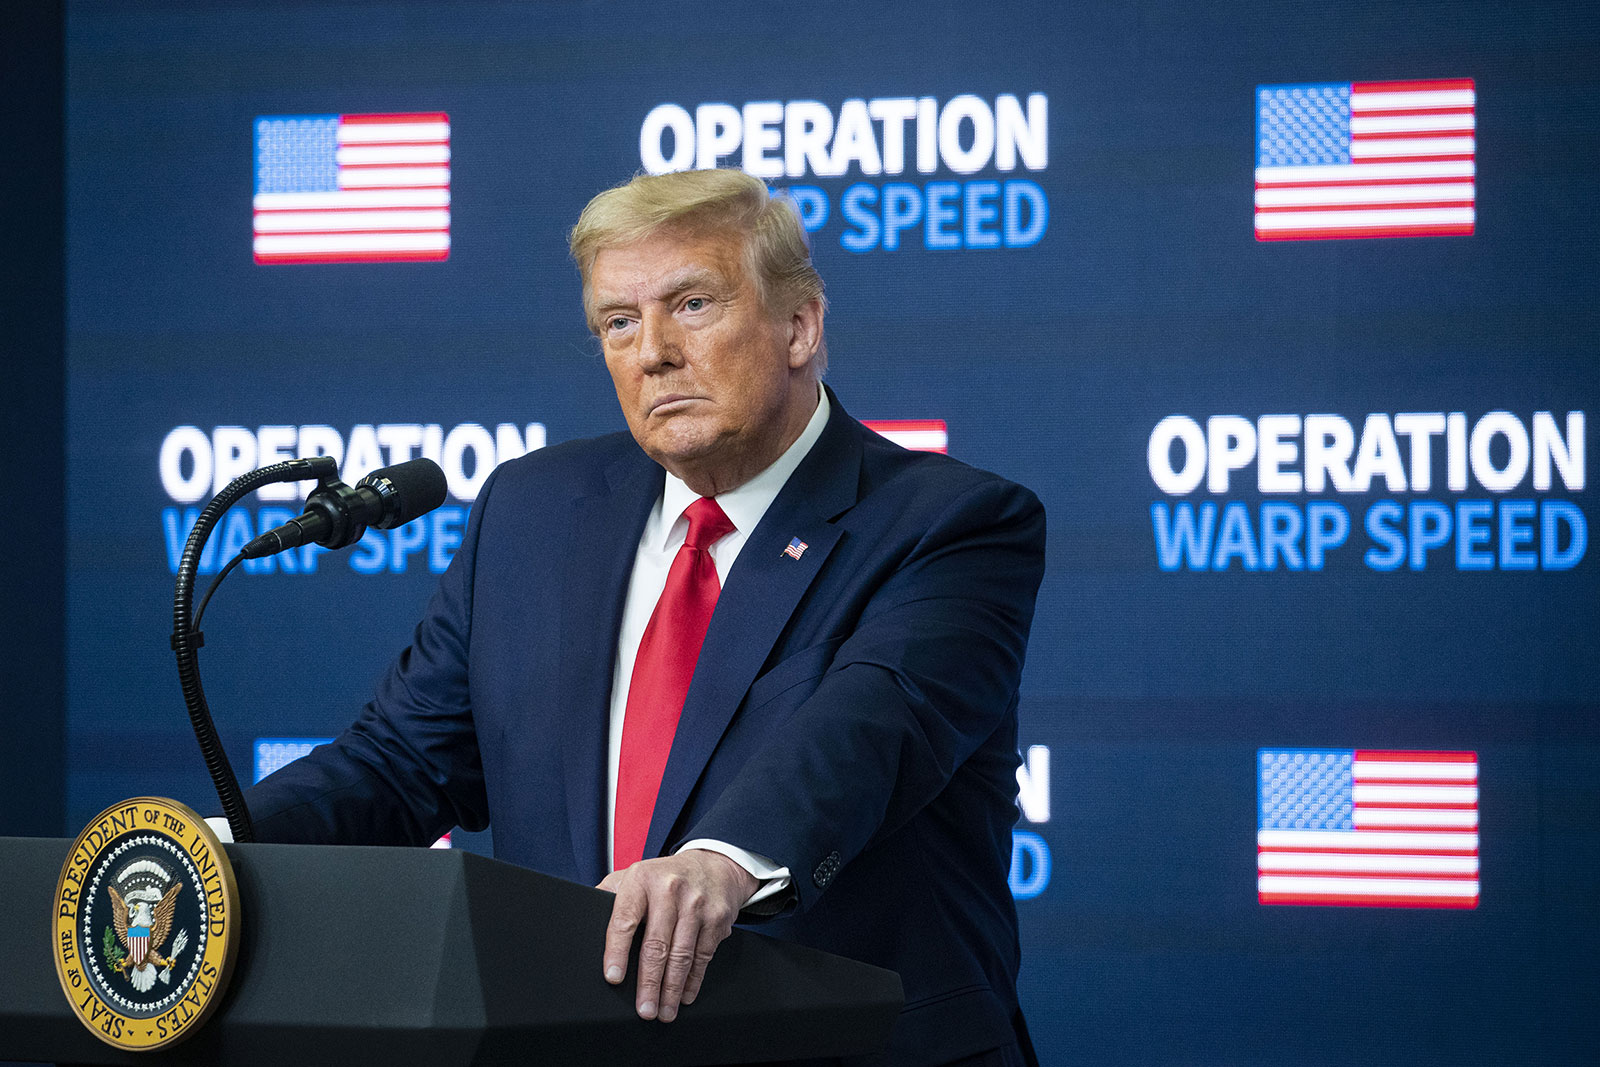 President Donald Trump speaks at an Operation Warp Speed vaccine summit at the White House on December 8.